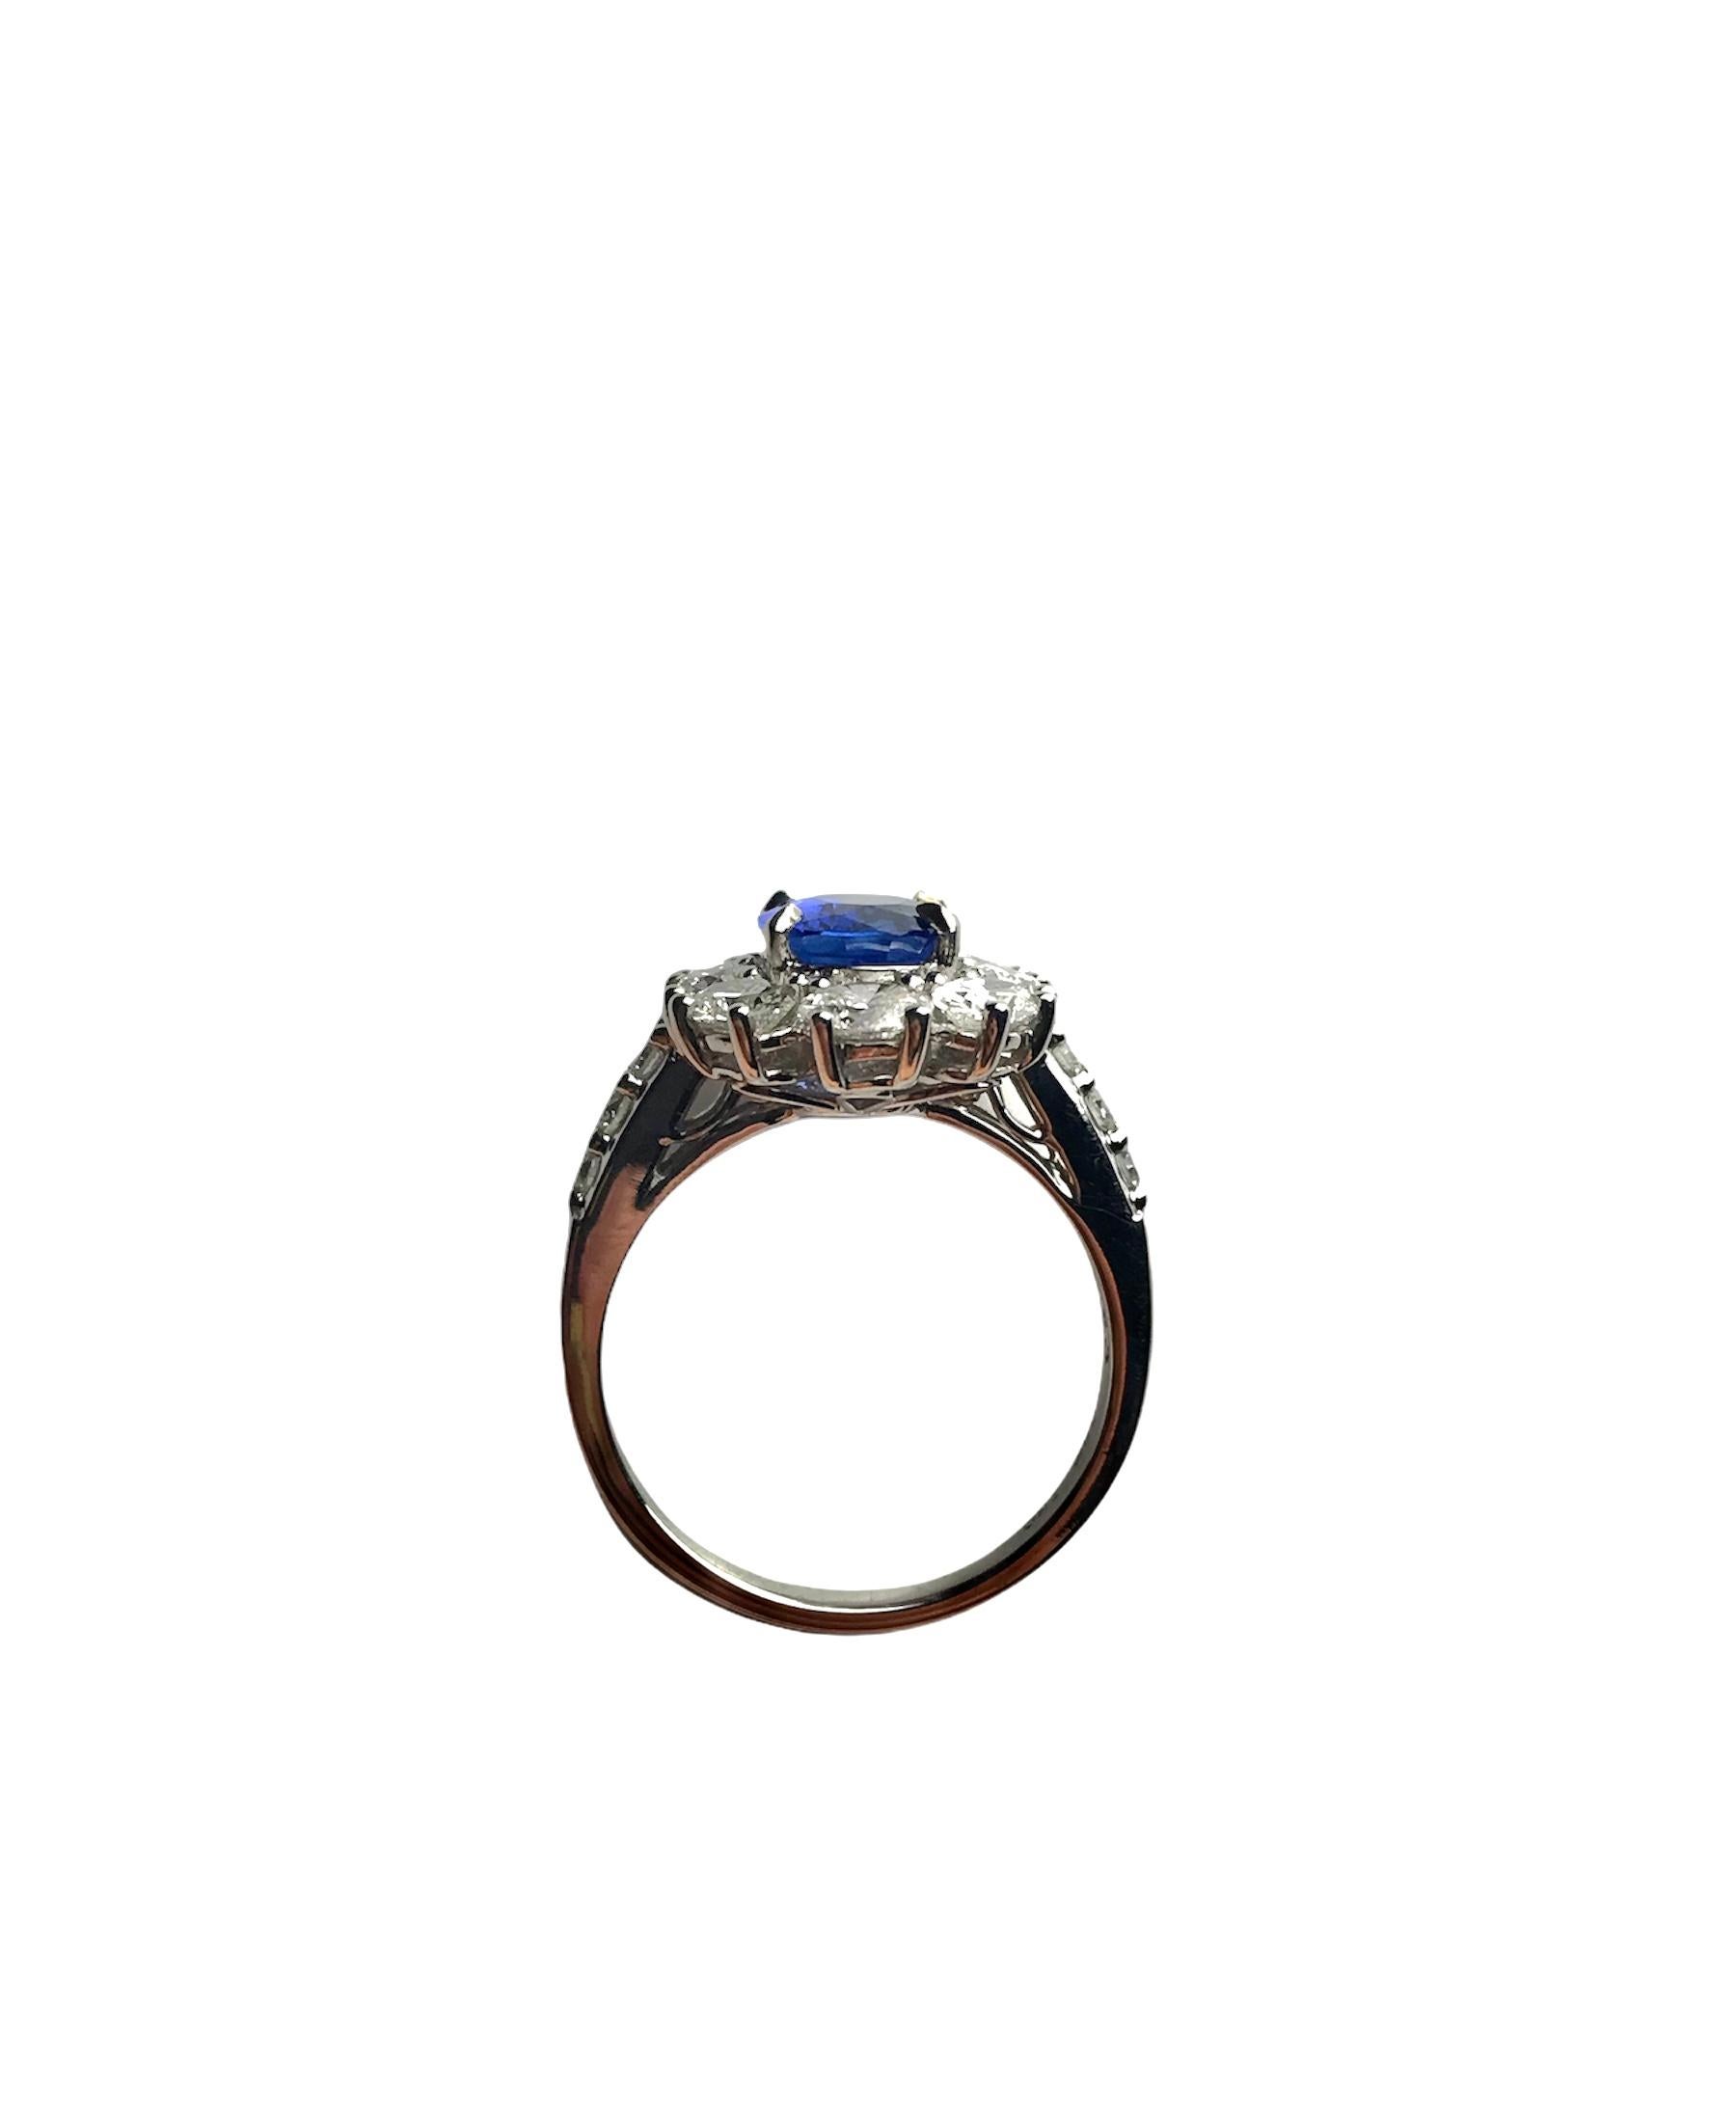 1.89 Ct Oval Cut Ceylon Sapphire Ring with 1.53 Carat Diamond Halo in 18k ref334 For Sale 1